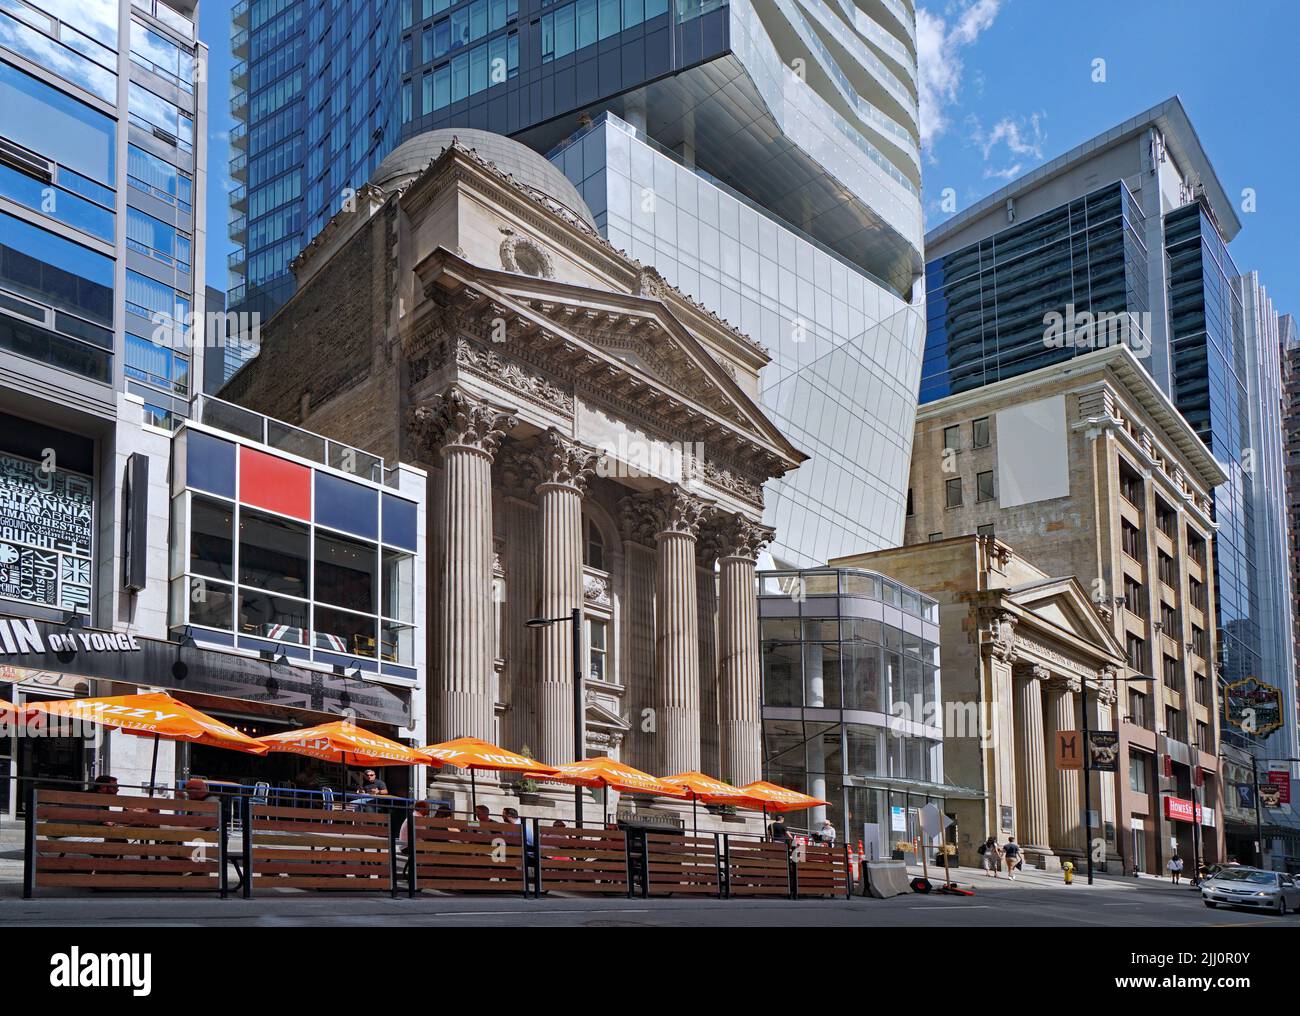 Toronto, Ontario, Canada - Outdoor seating at a pub on Yonge Street in downtown Toronto, with 19th century classical style bank facades preserved in m Stock Photo